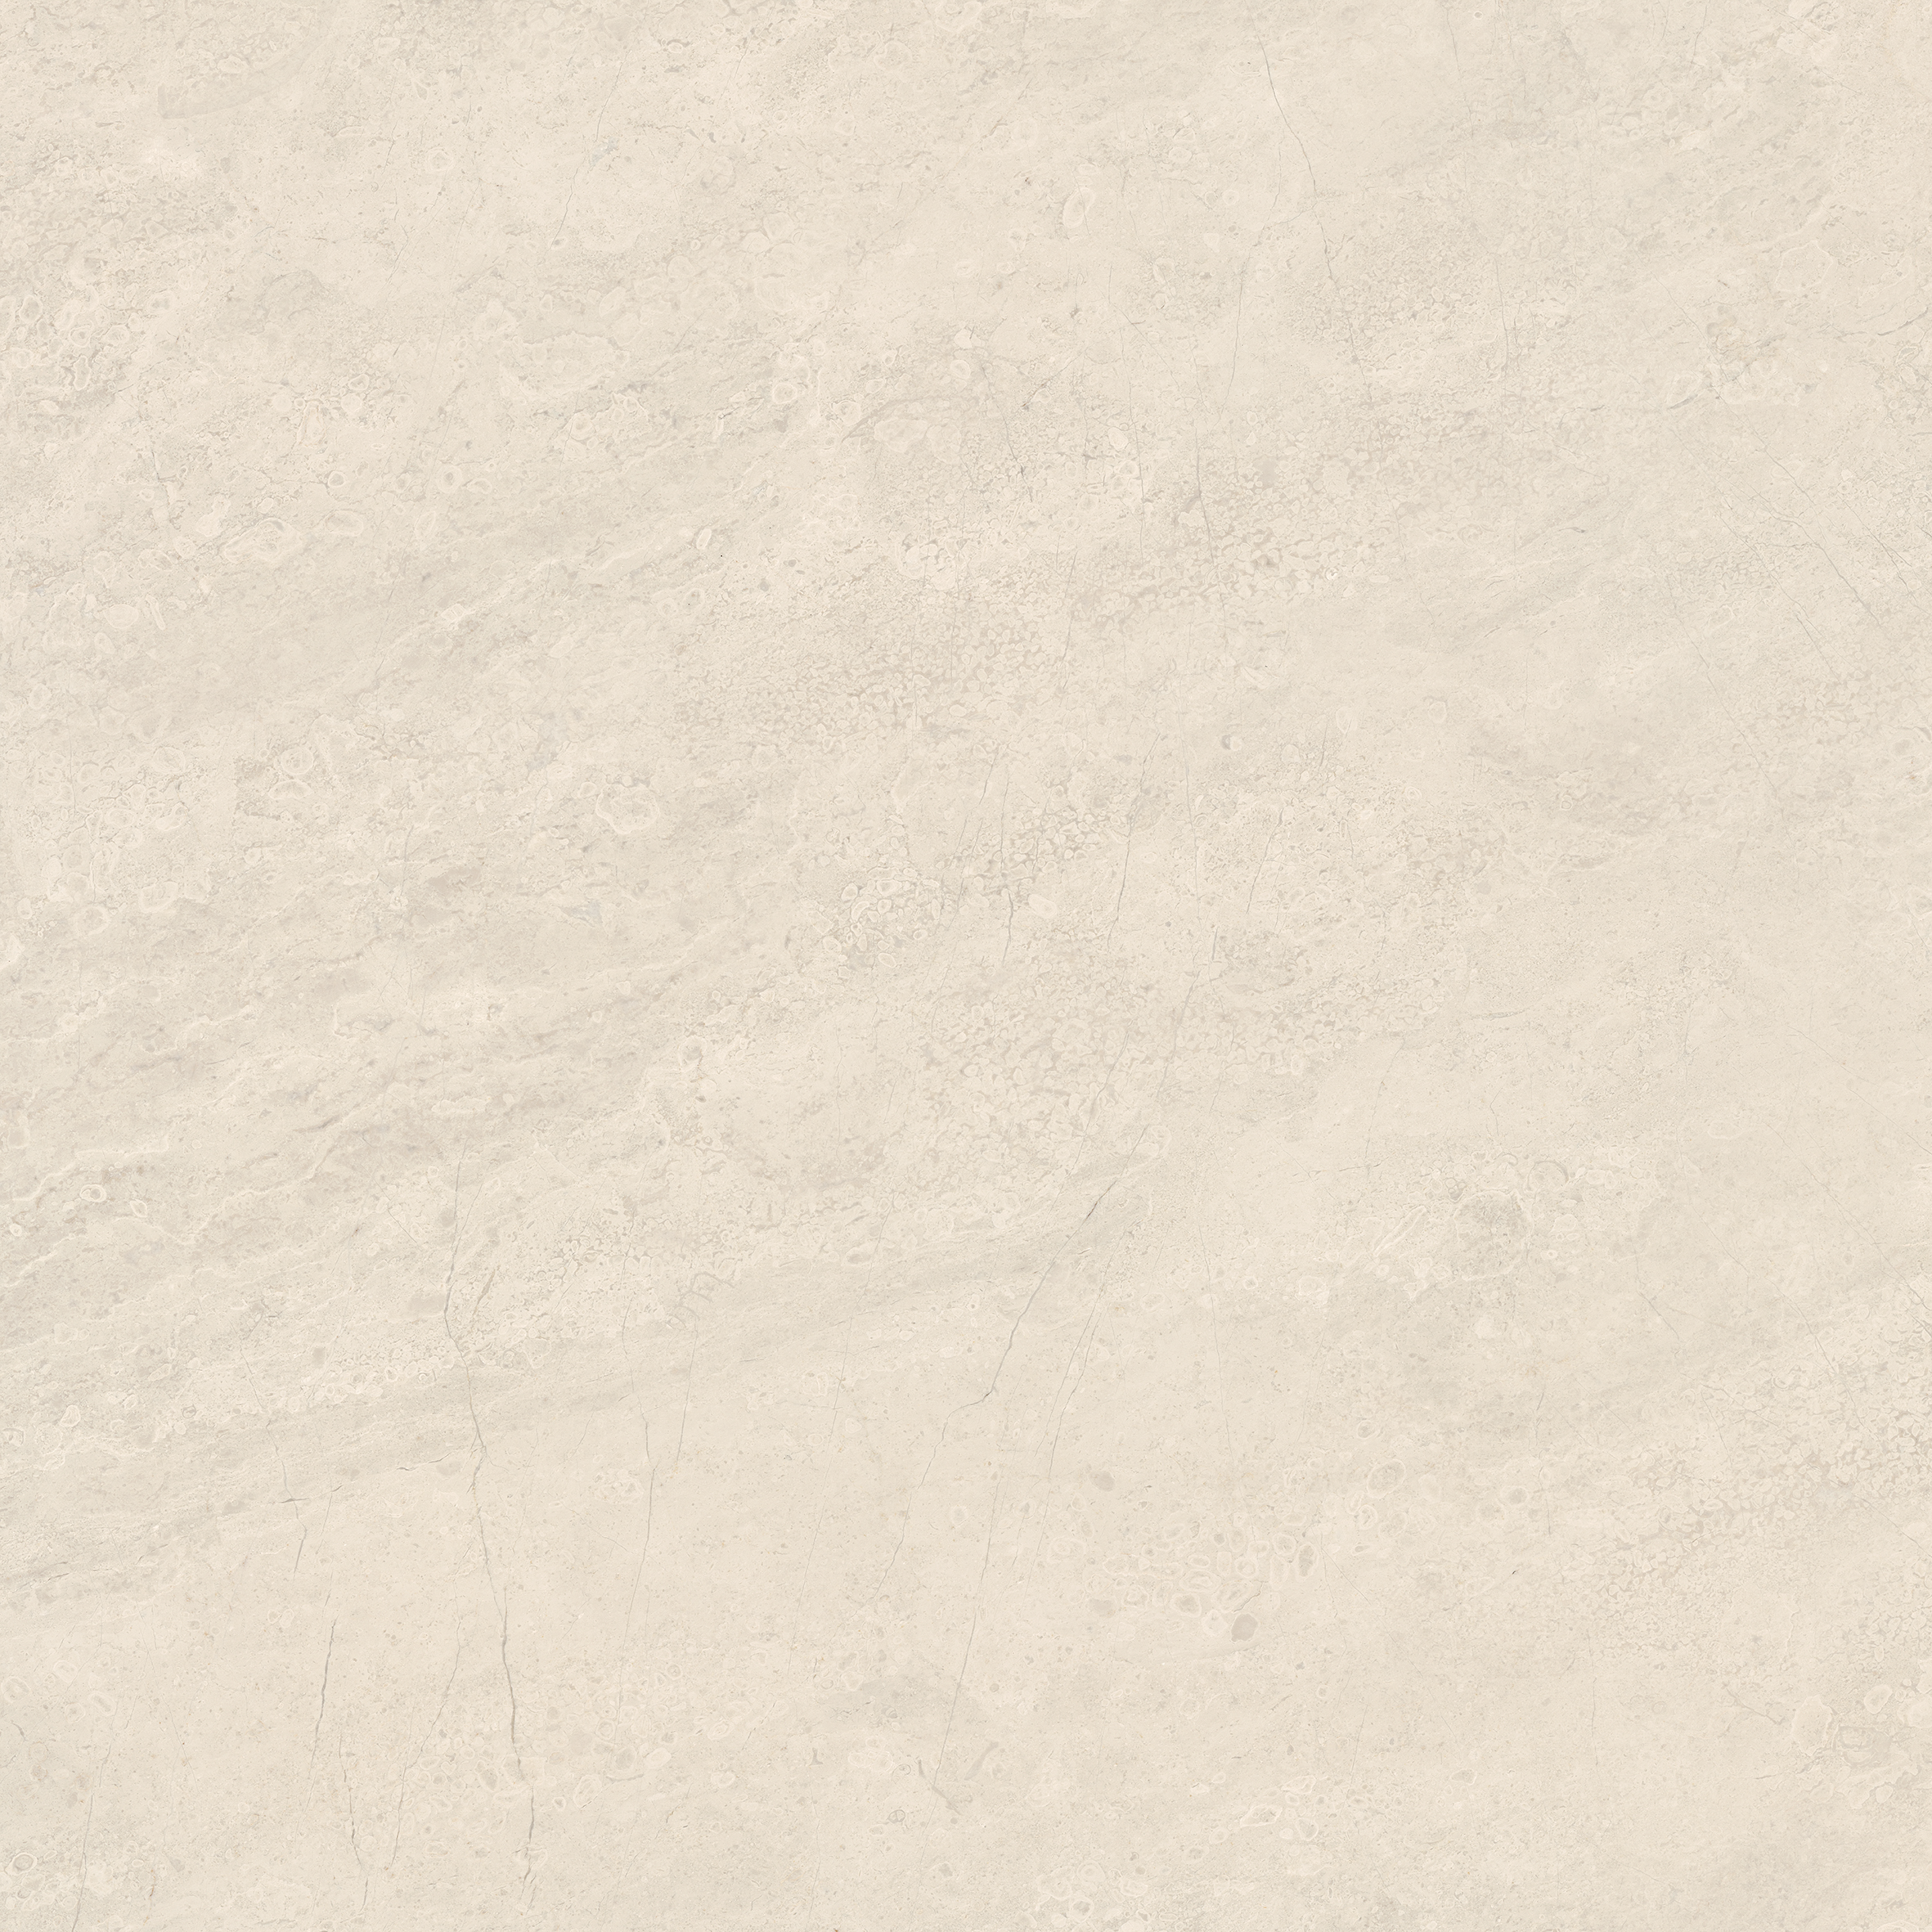 allure ivory pattern glazed porcelain field tile from mayfair anatolia collection distributed by surface group international polished finish rectified edge 24x24 square shape